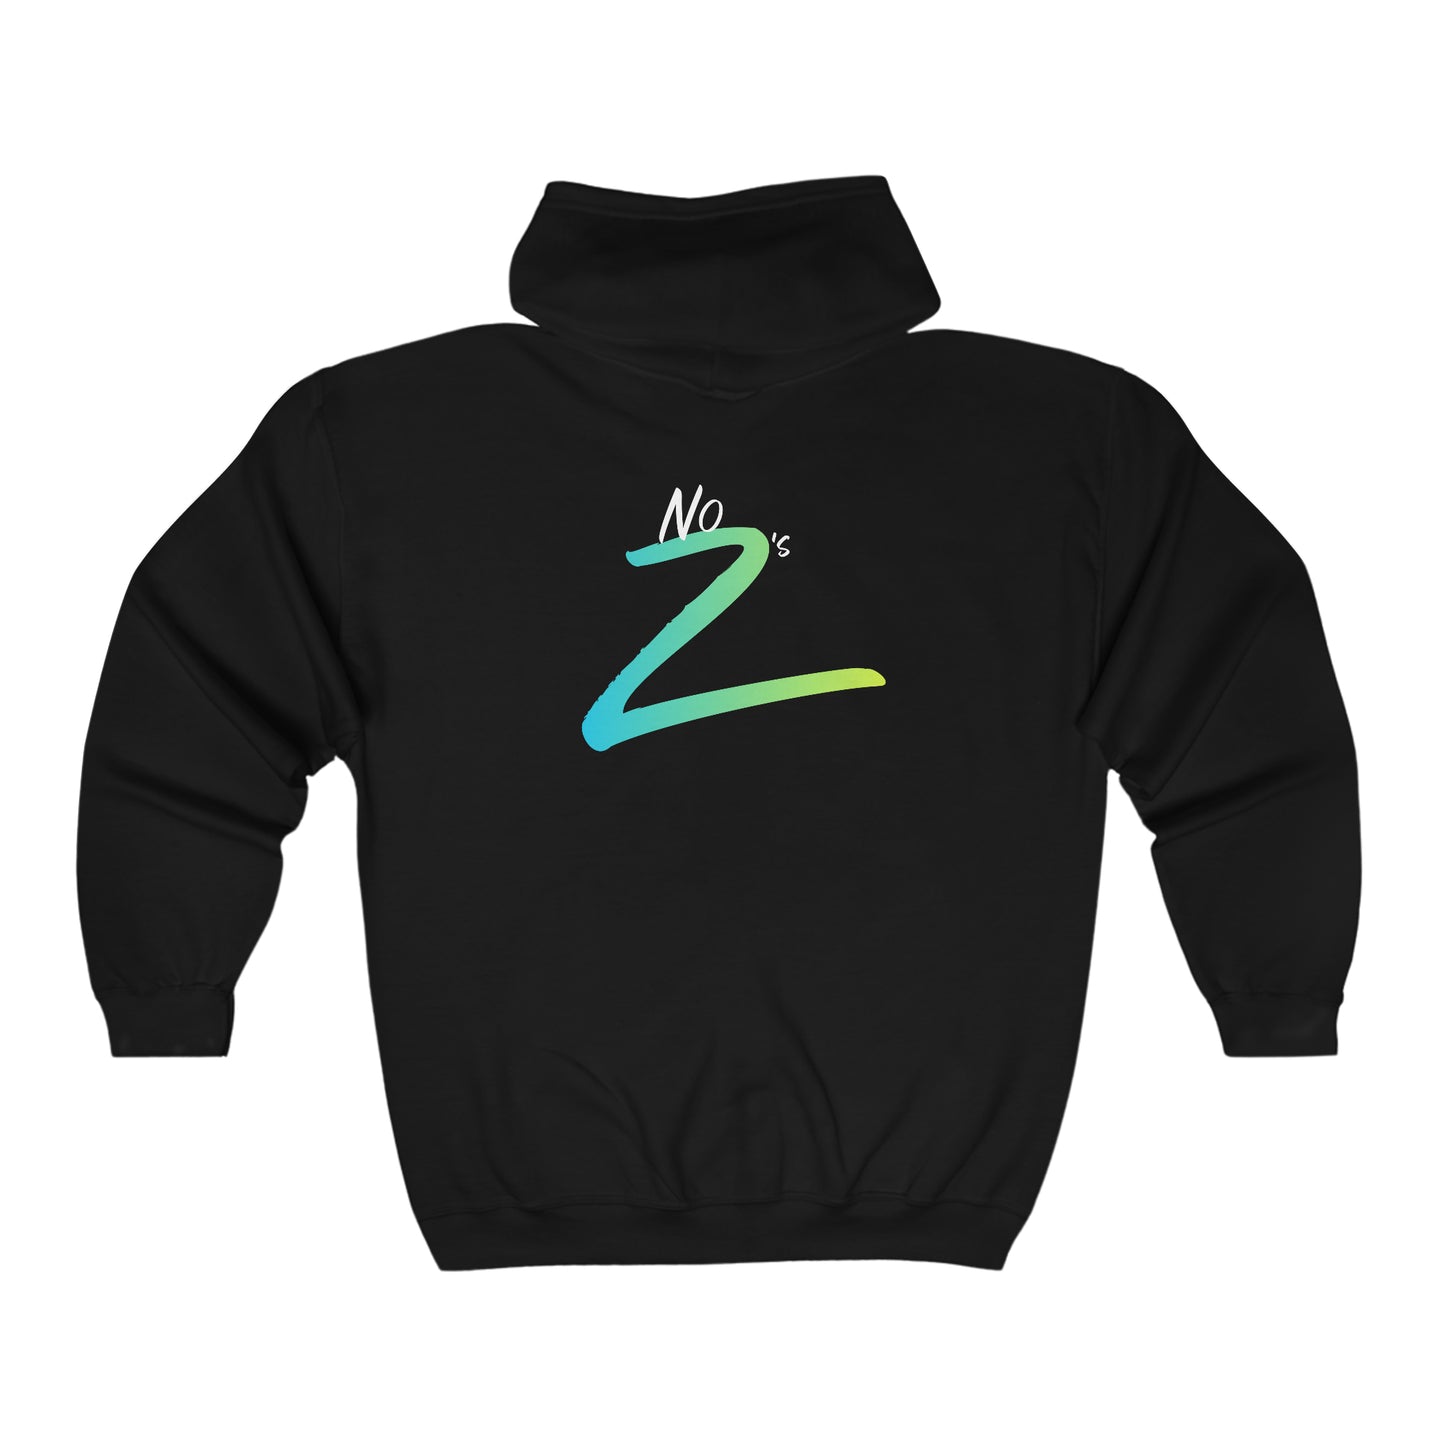 Limited Edition No Z's Hoodie